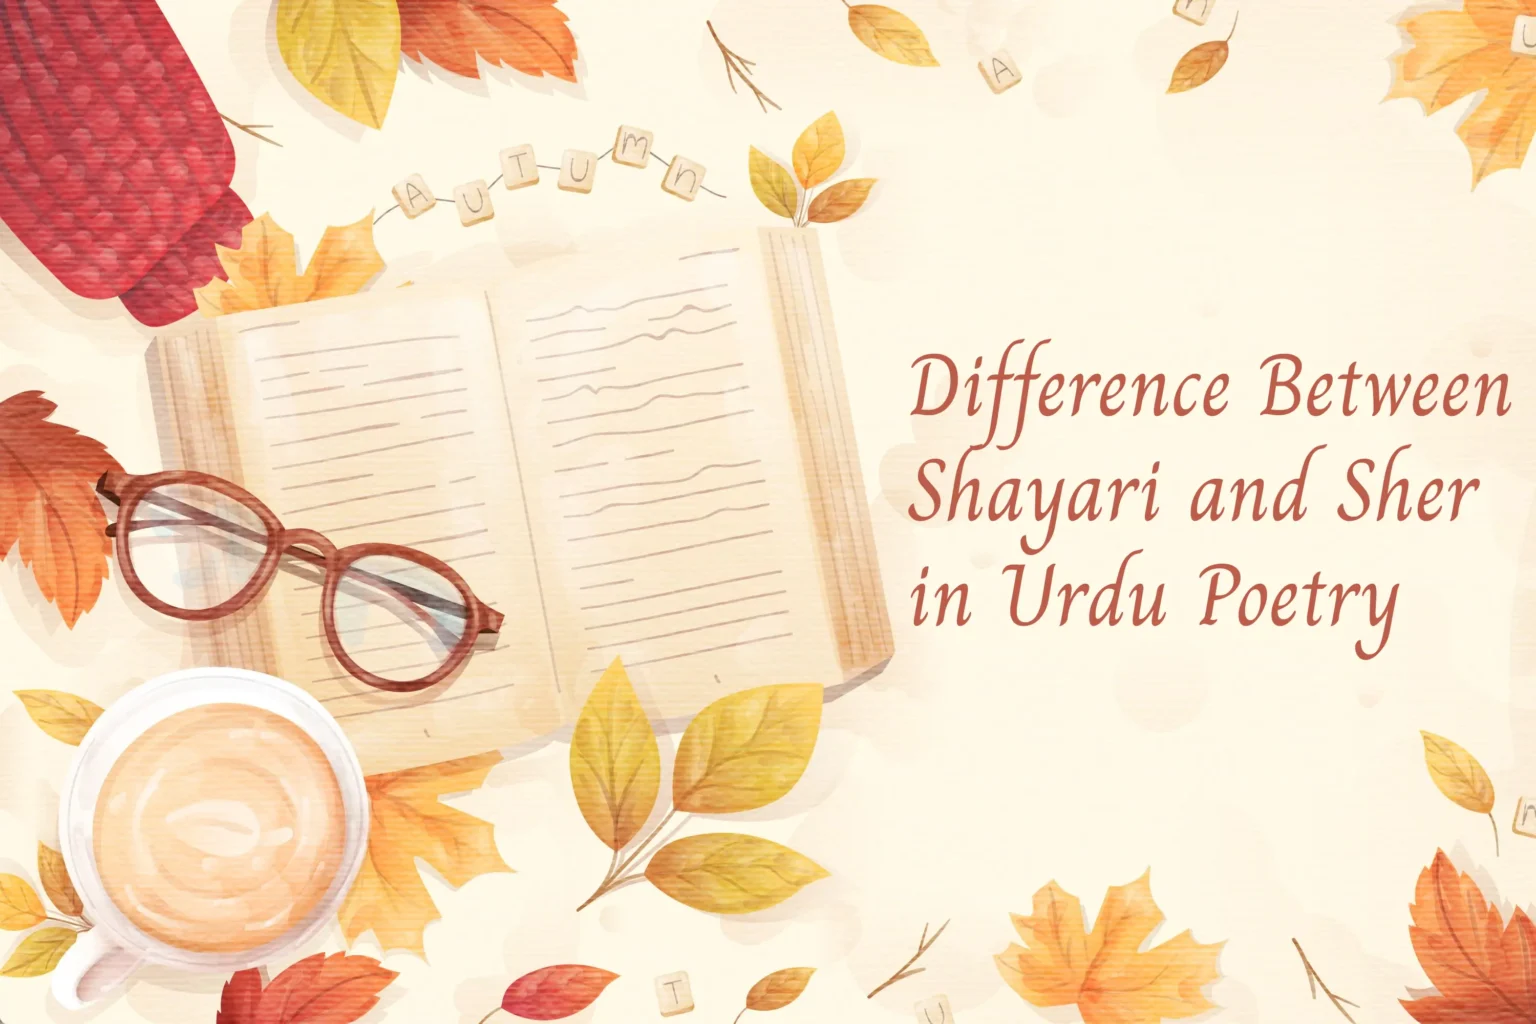 Difference Between Shayari and Sher in Urdu Poetry